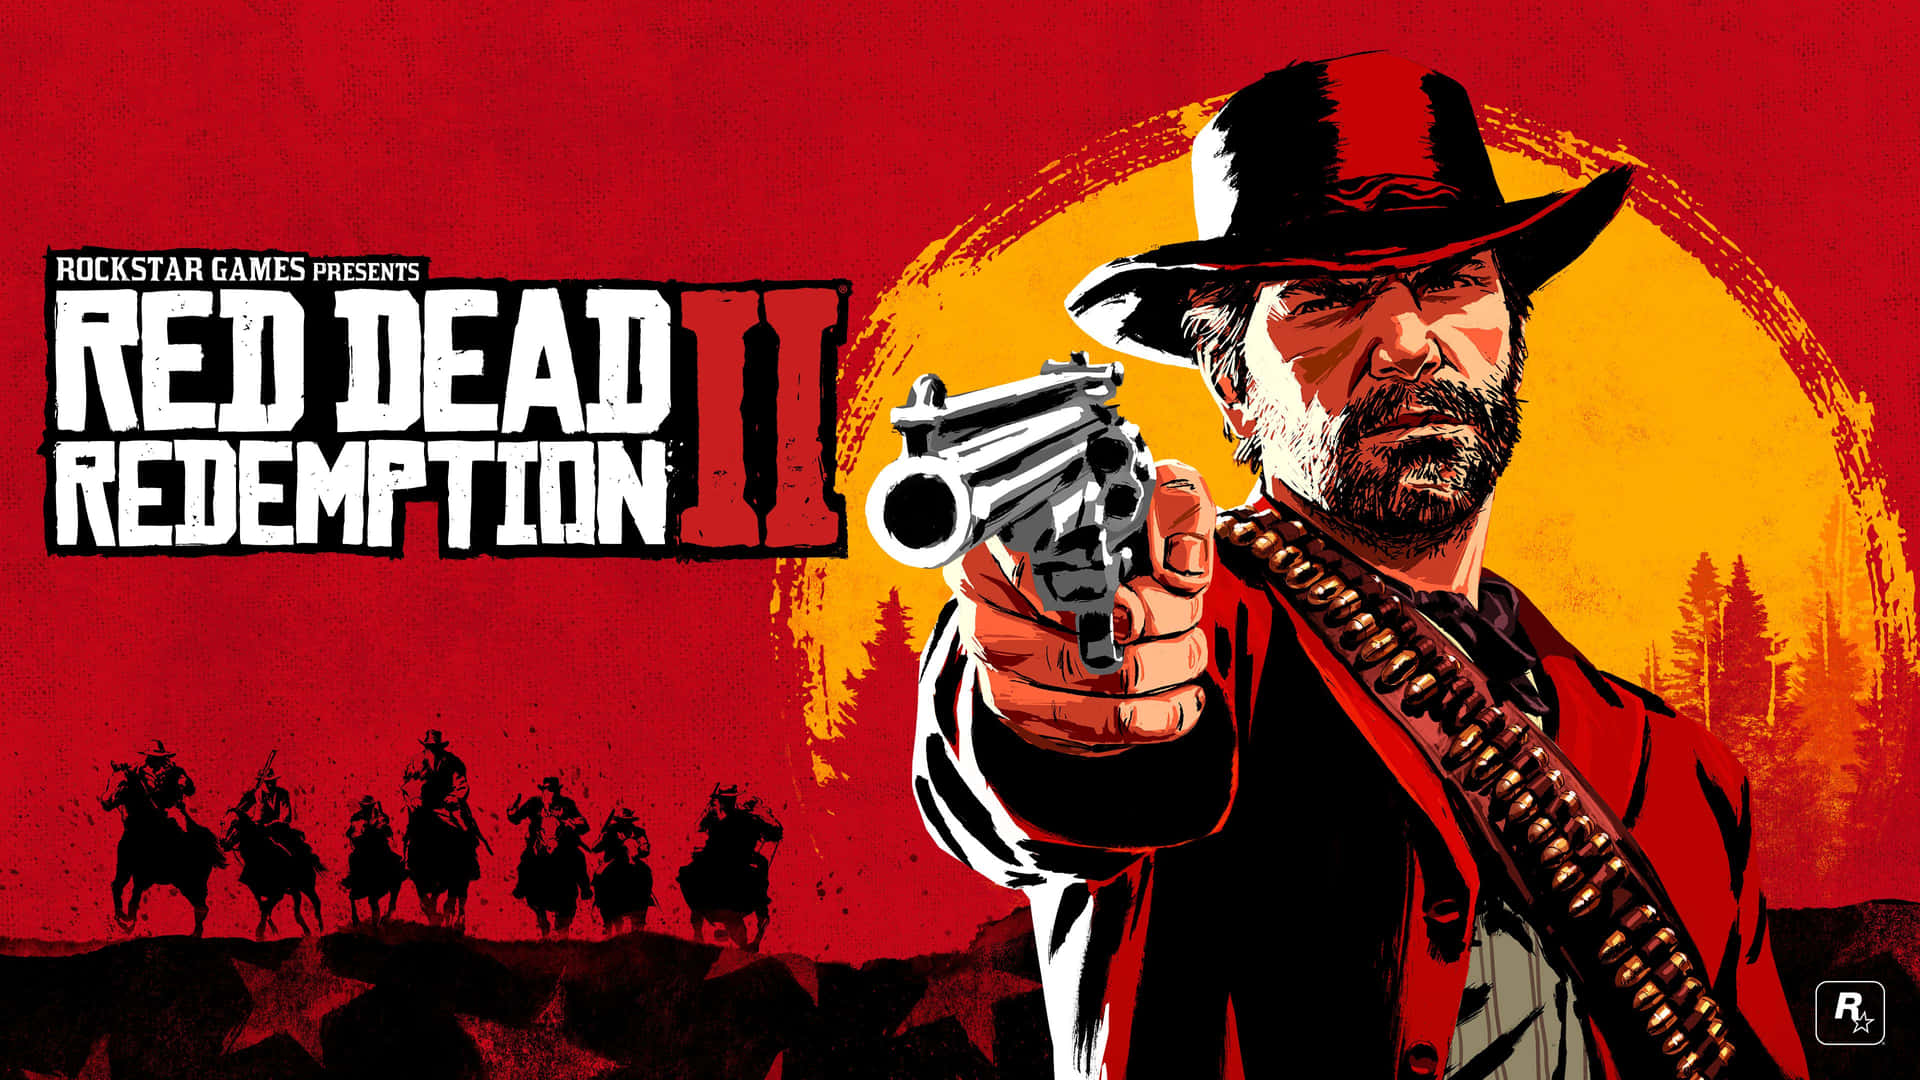 Top 999+ Red Dead Redemption 2 4k Wallpapers Full HD, 4K✅Free to Use